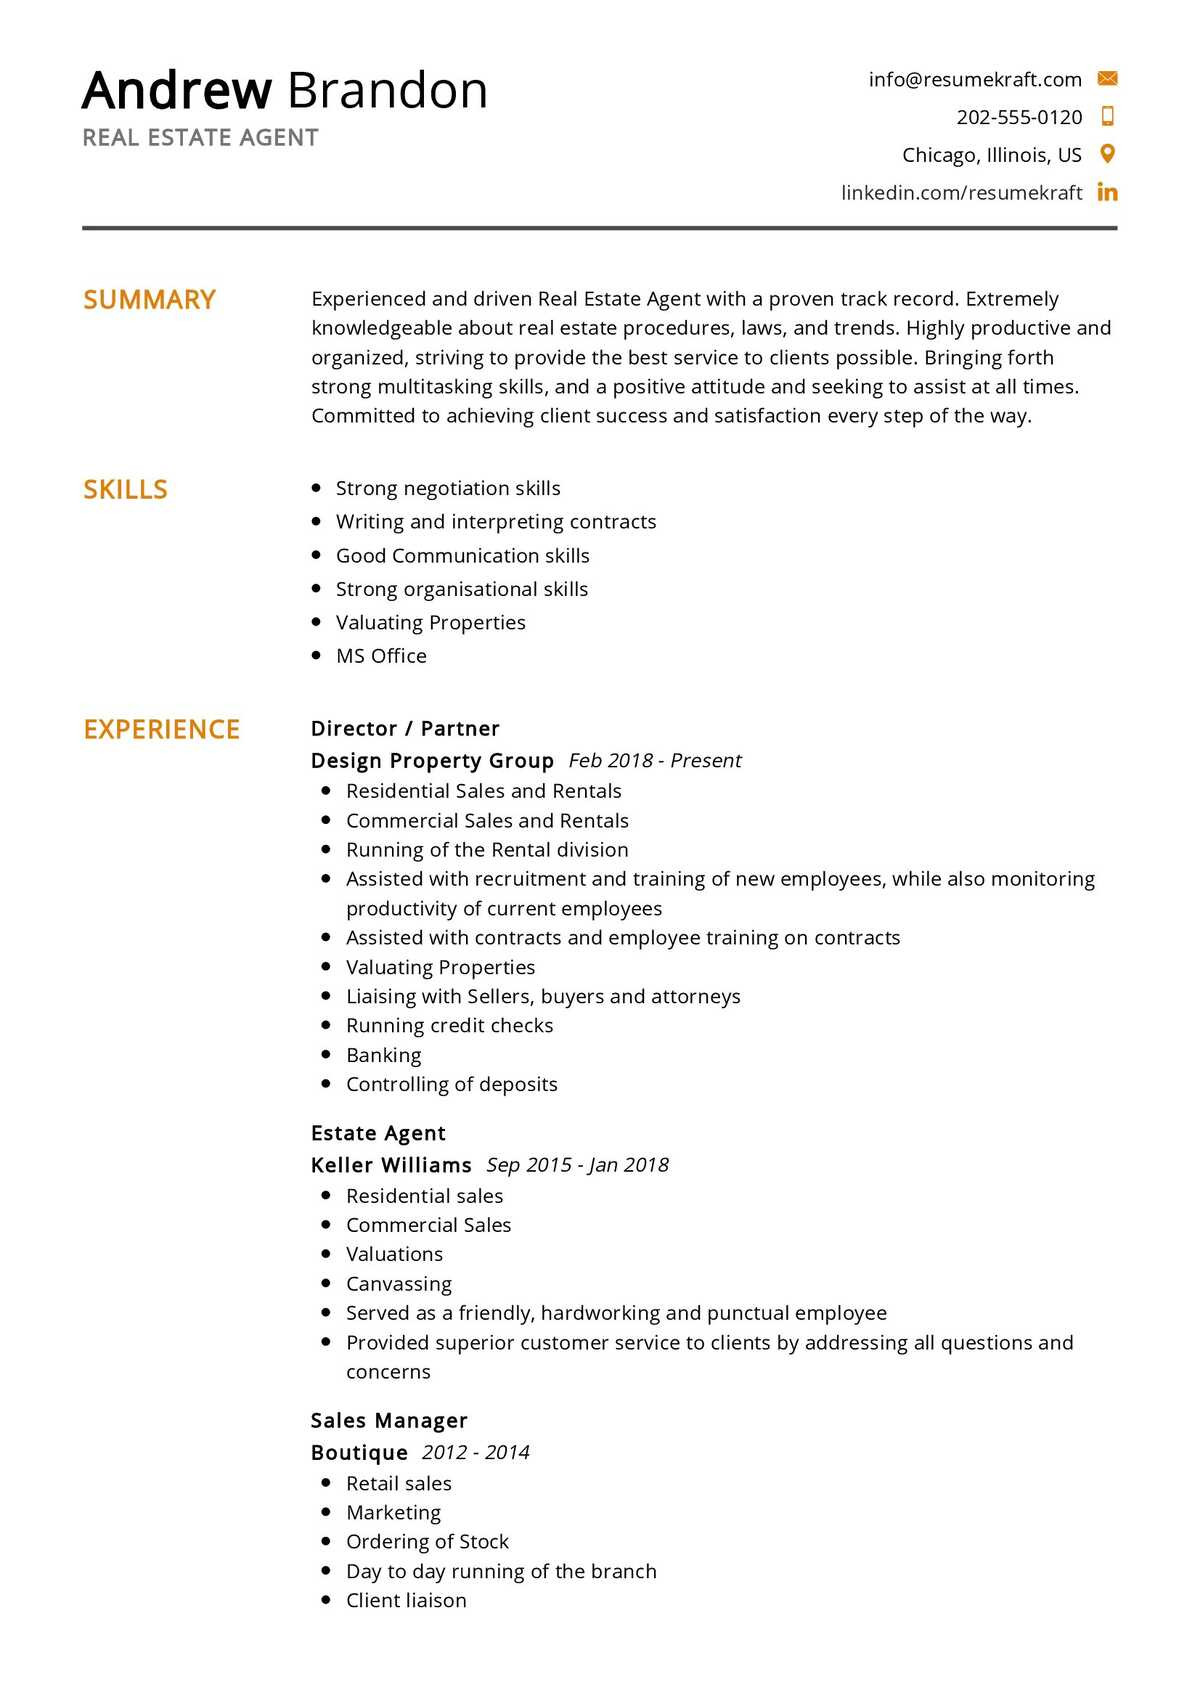 Sample Resumes for Real Estate attorneys Real Estate Agent Resume Sample 2022 Writing Tips – Resumekraft